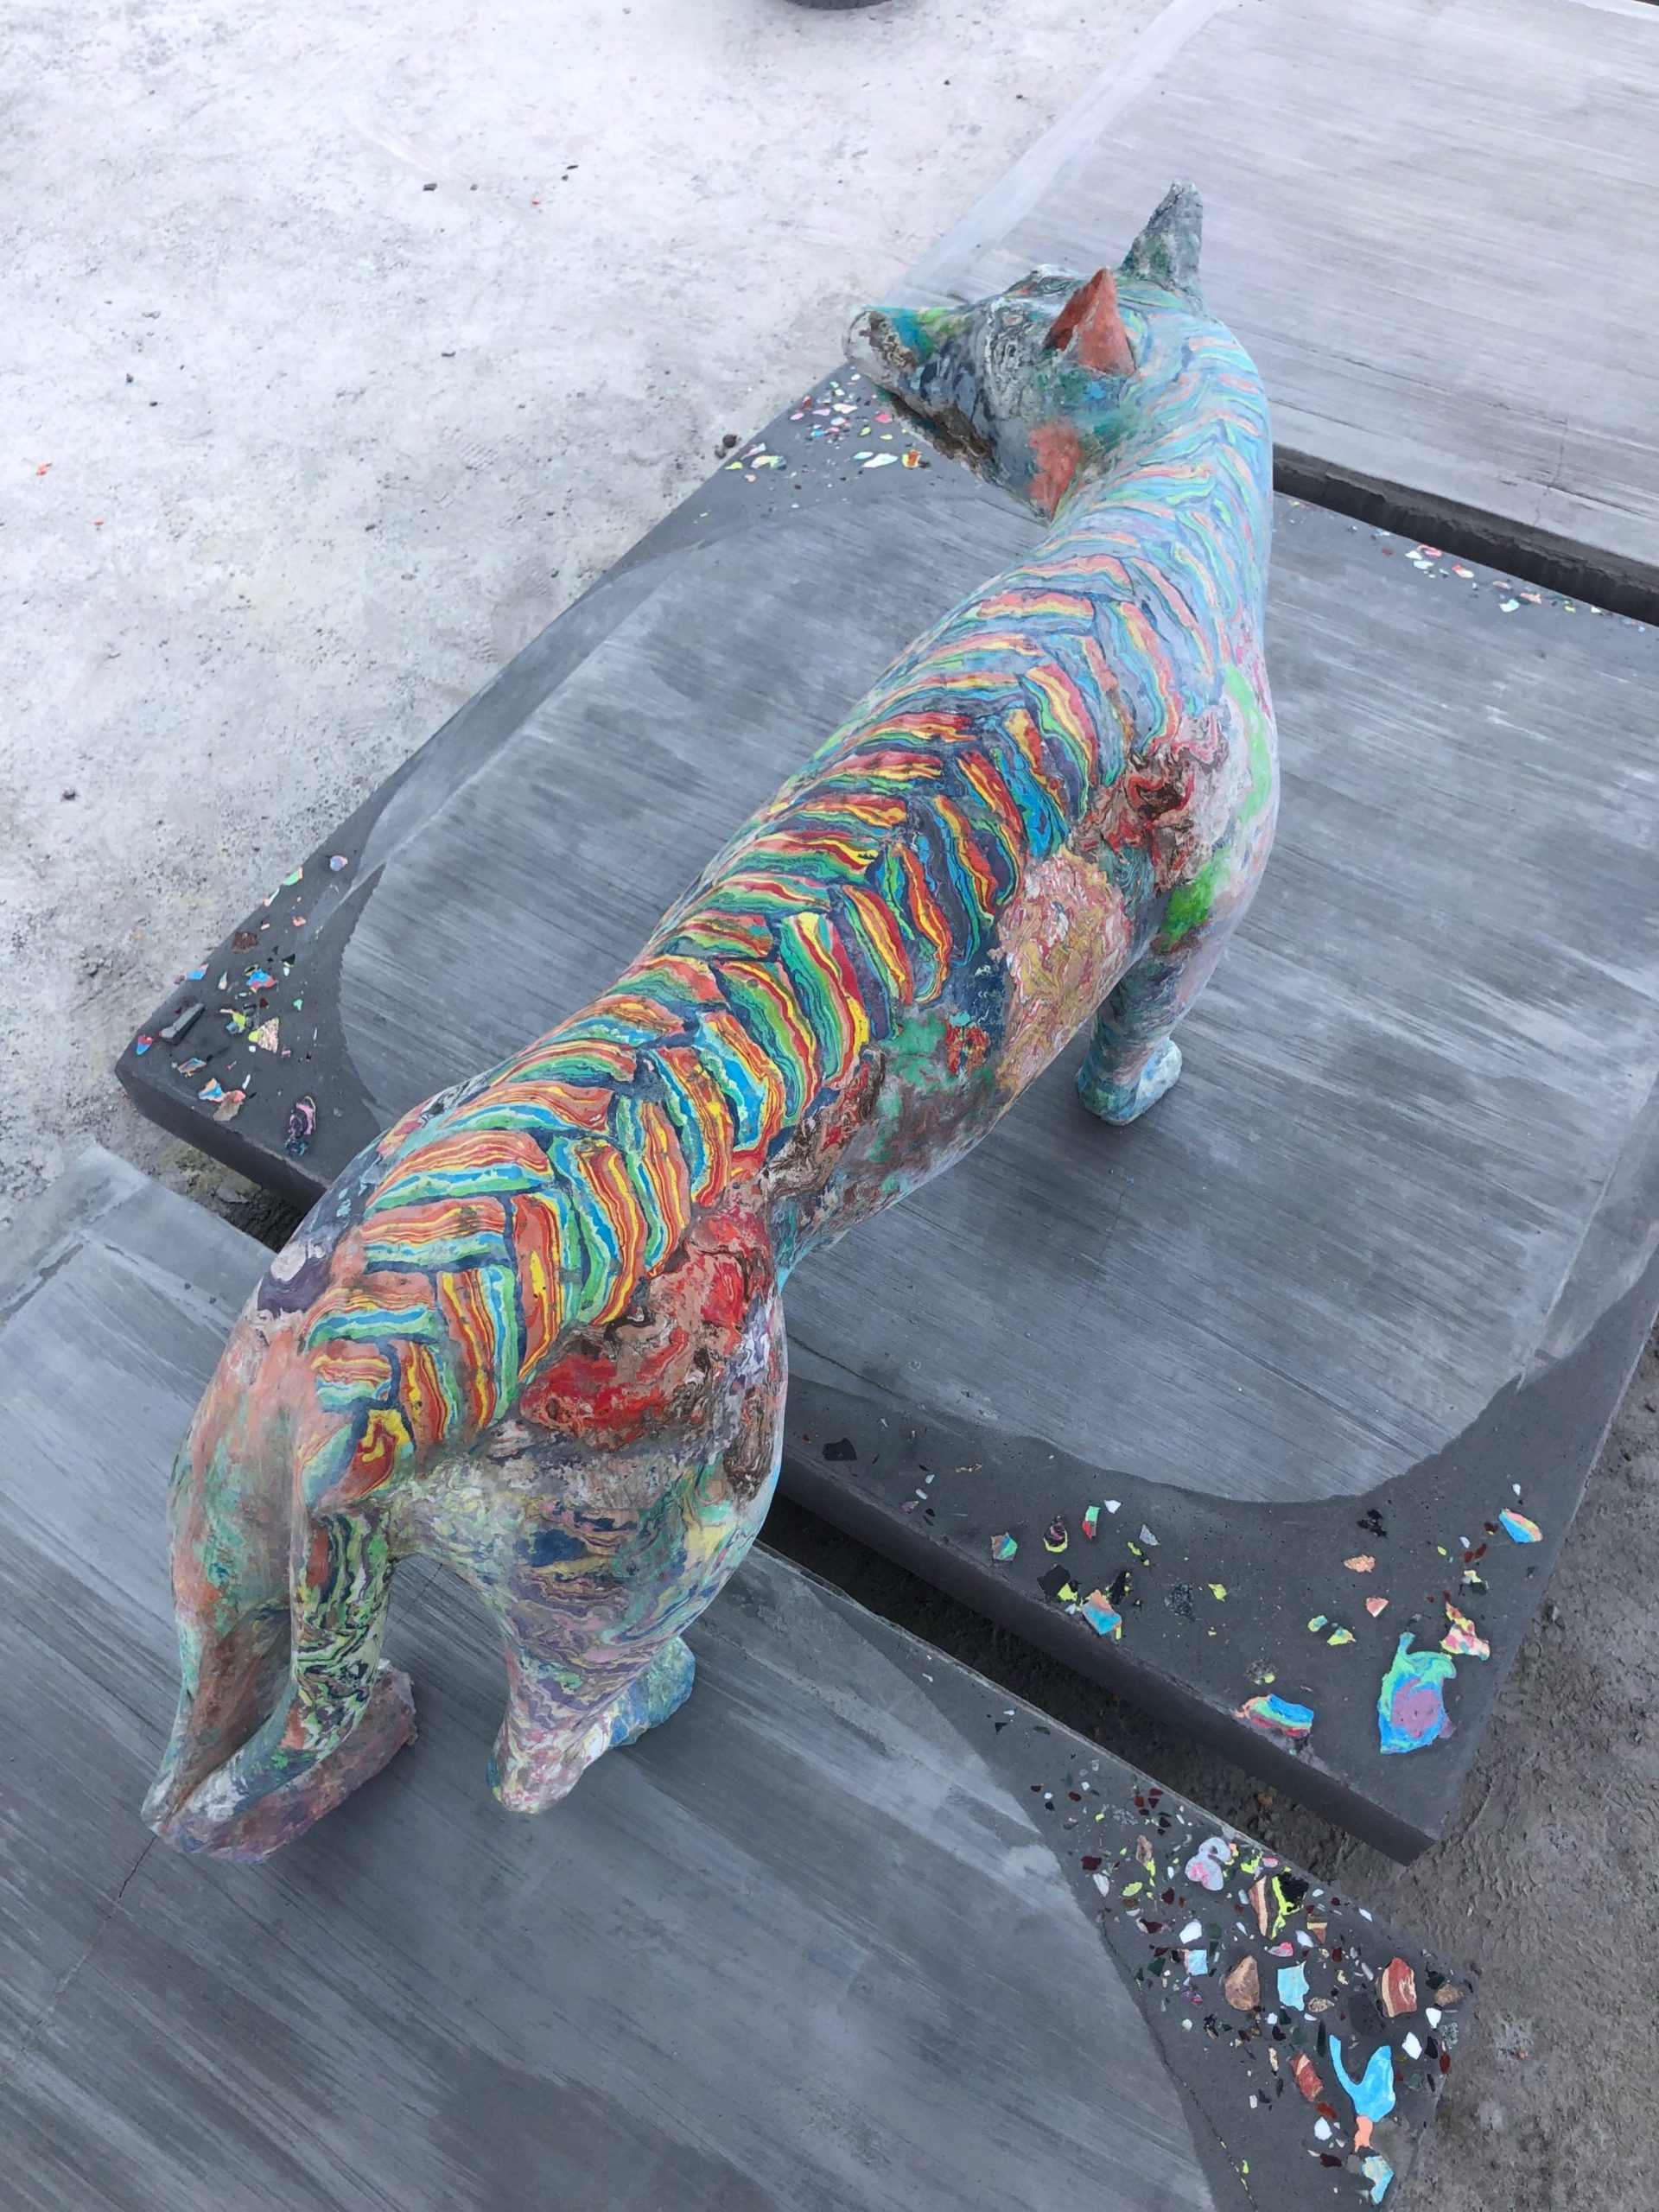 Top of She-Wolf and Ramp sculpture by Lily Cox-Richard, depicting a multicolored she-wolf on a sidewalk